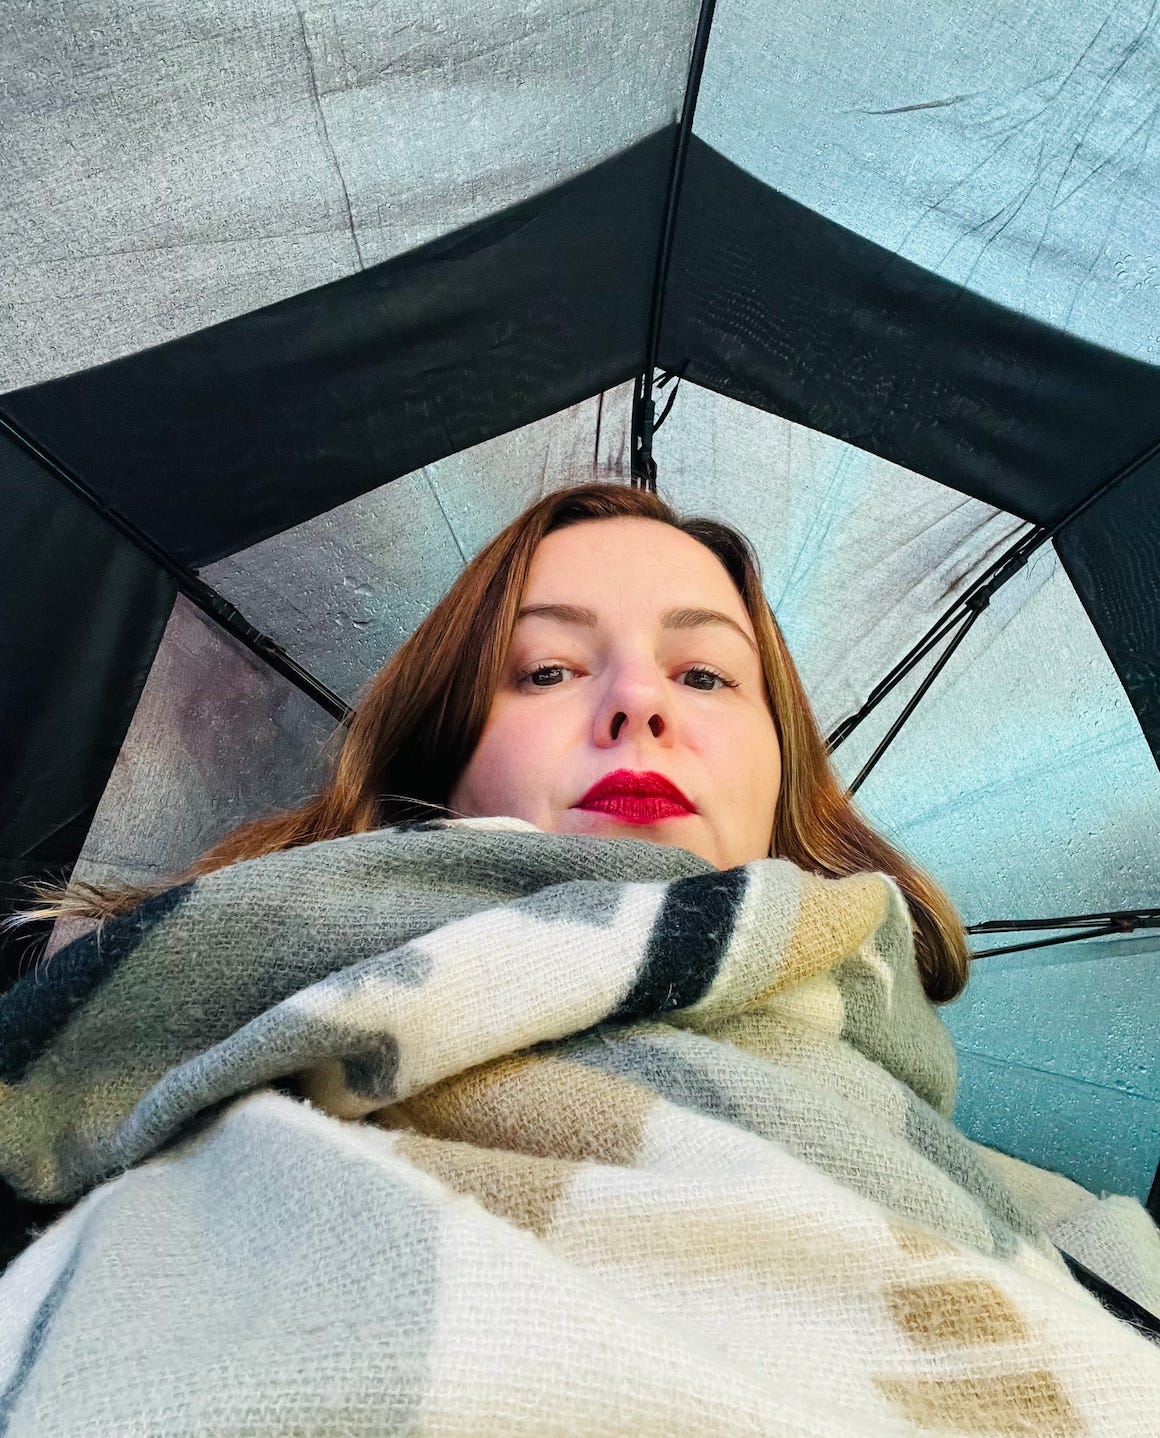 Amber takes a selfie. The phone is low, pointing upward at her face. She has an open umbrella over her head, covering the background of the photo. She wears a scarf and red lipstick. 